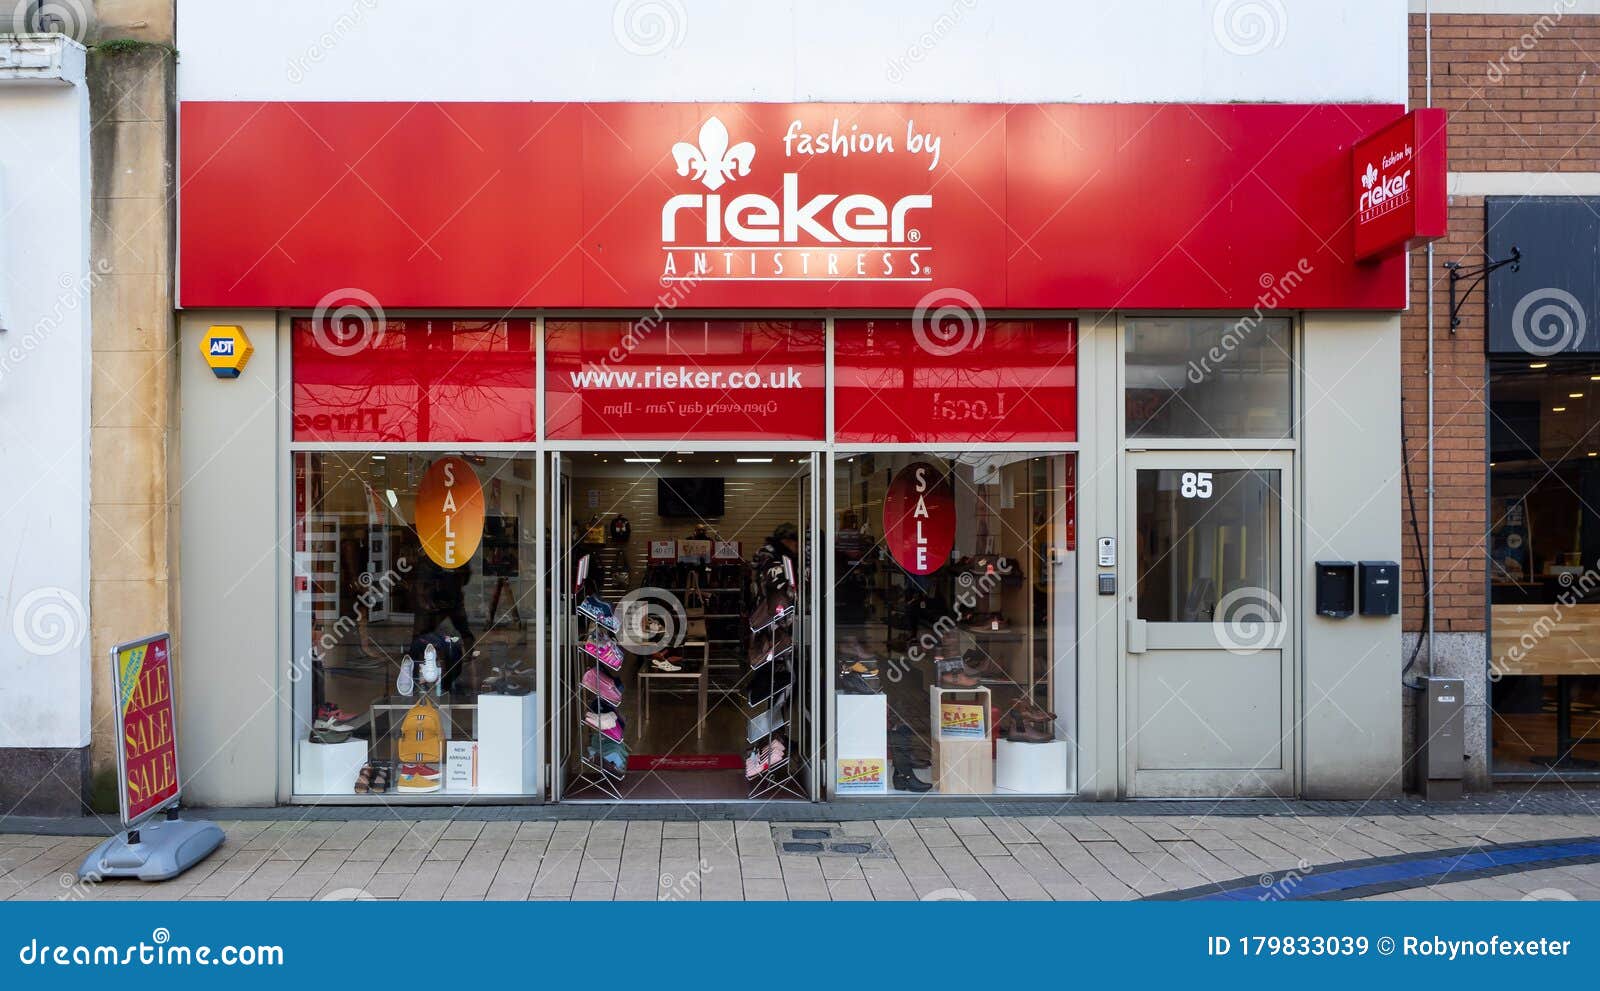 Bristol, UK - February 12 2020: Rieker Antistress Shoe Shop on the Galleries Editorial Stock Image - Image of fashion, comfortable: 179833039